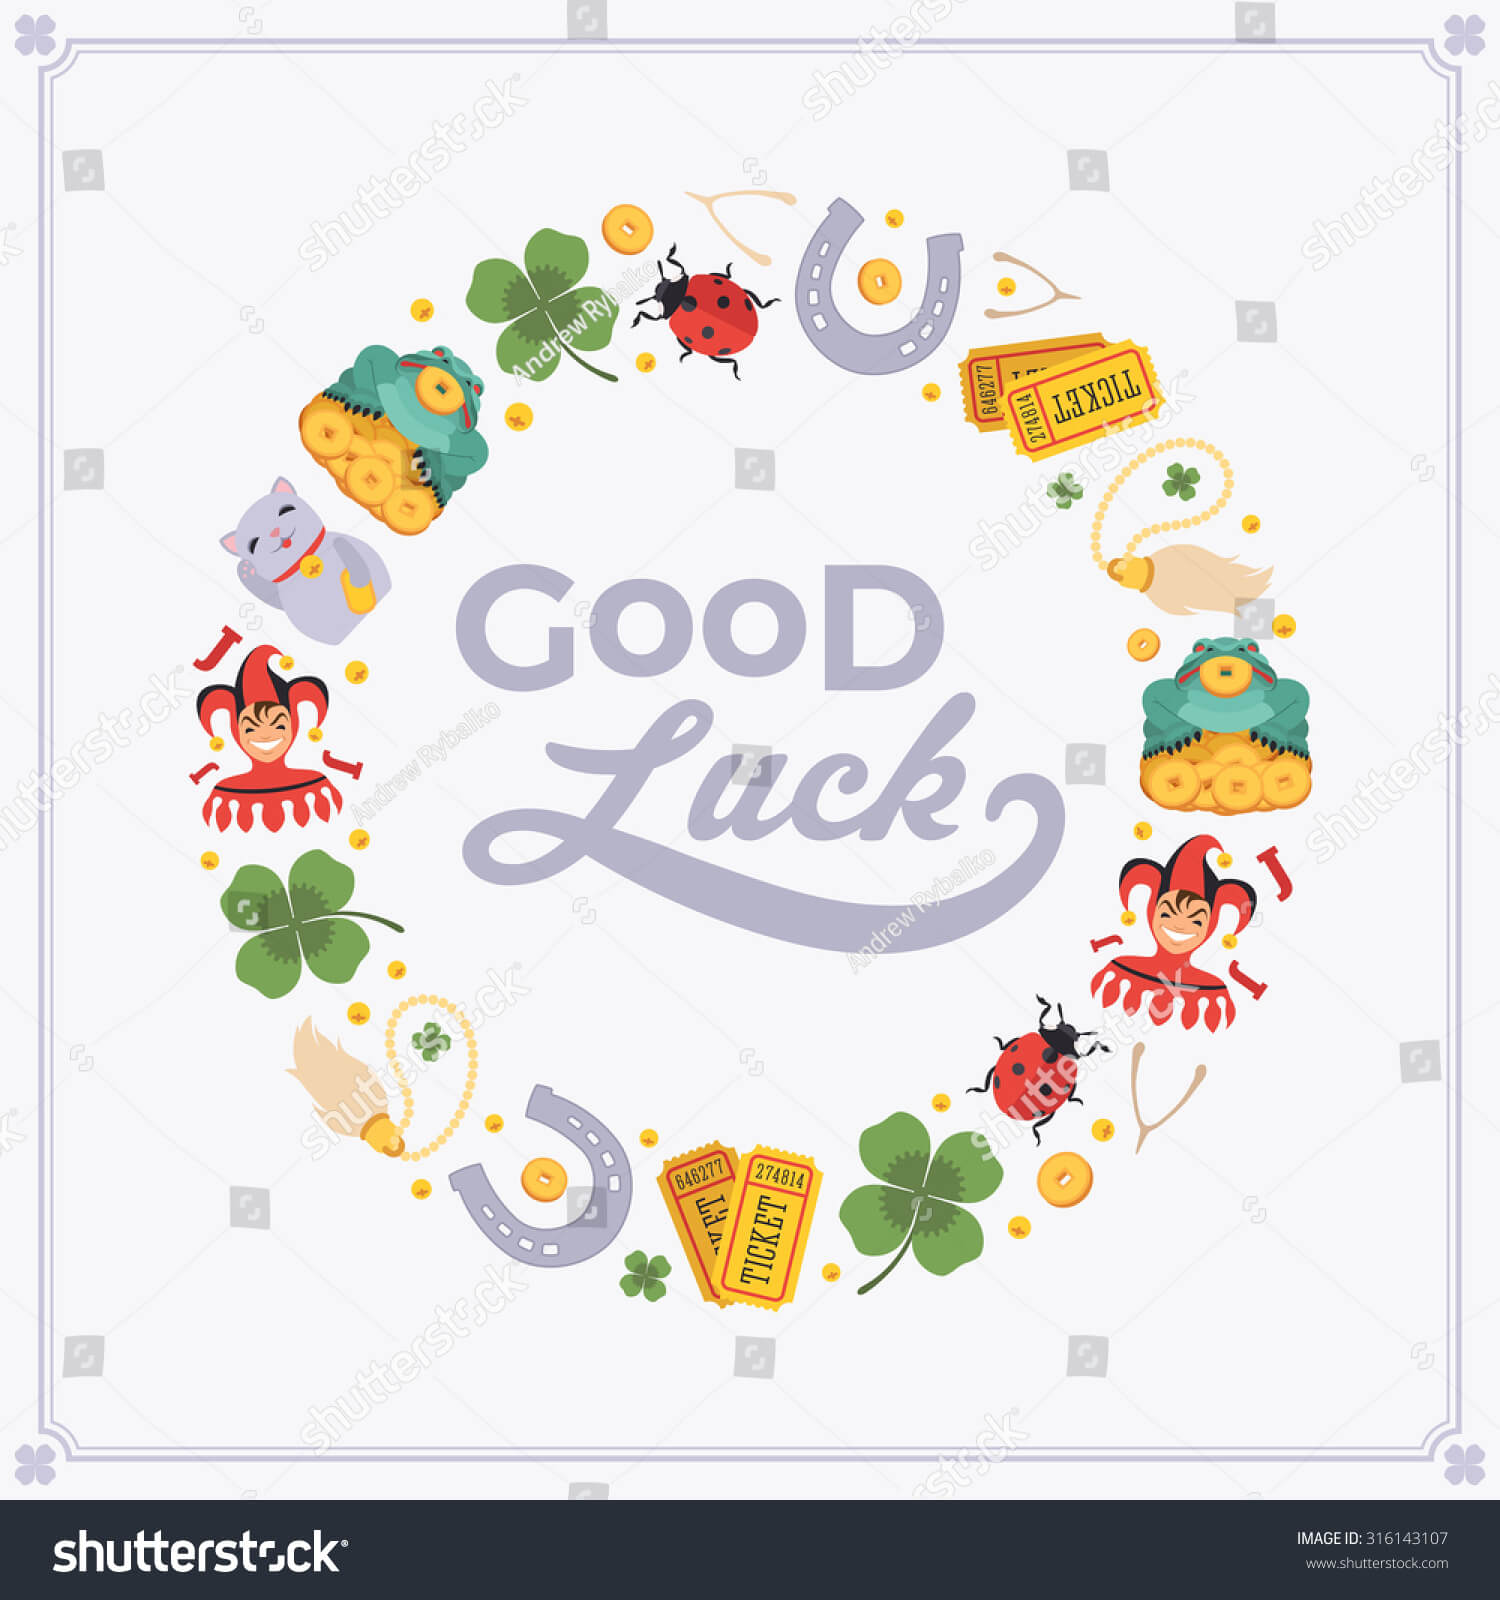 Vector Decorating Design Made Lucky Charms Stock Vector With Good Luck Card Template